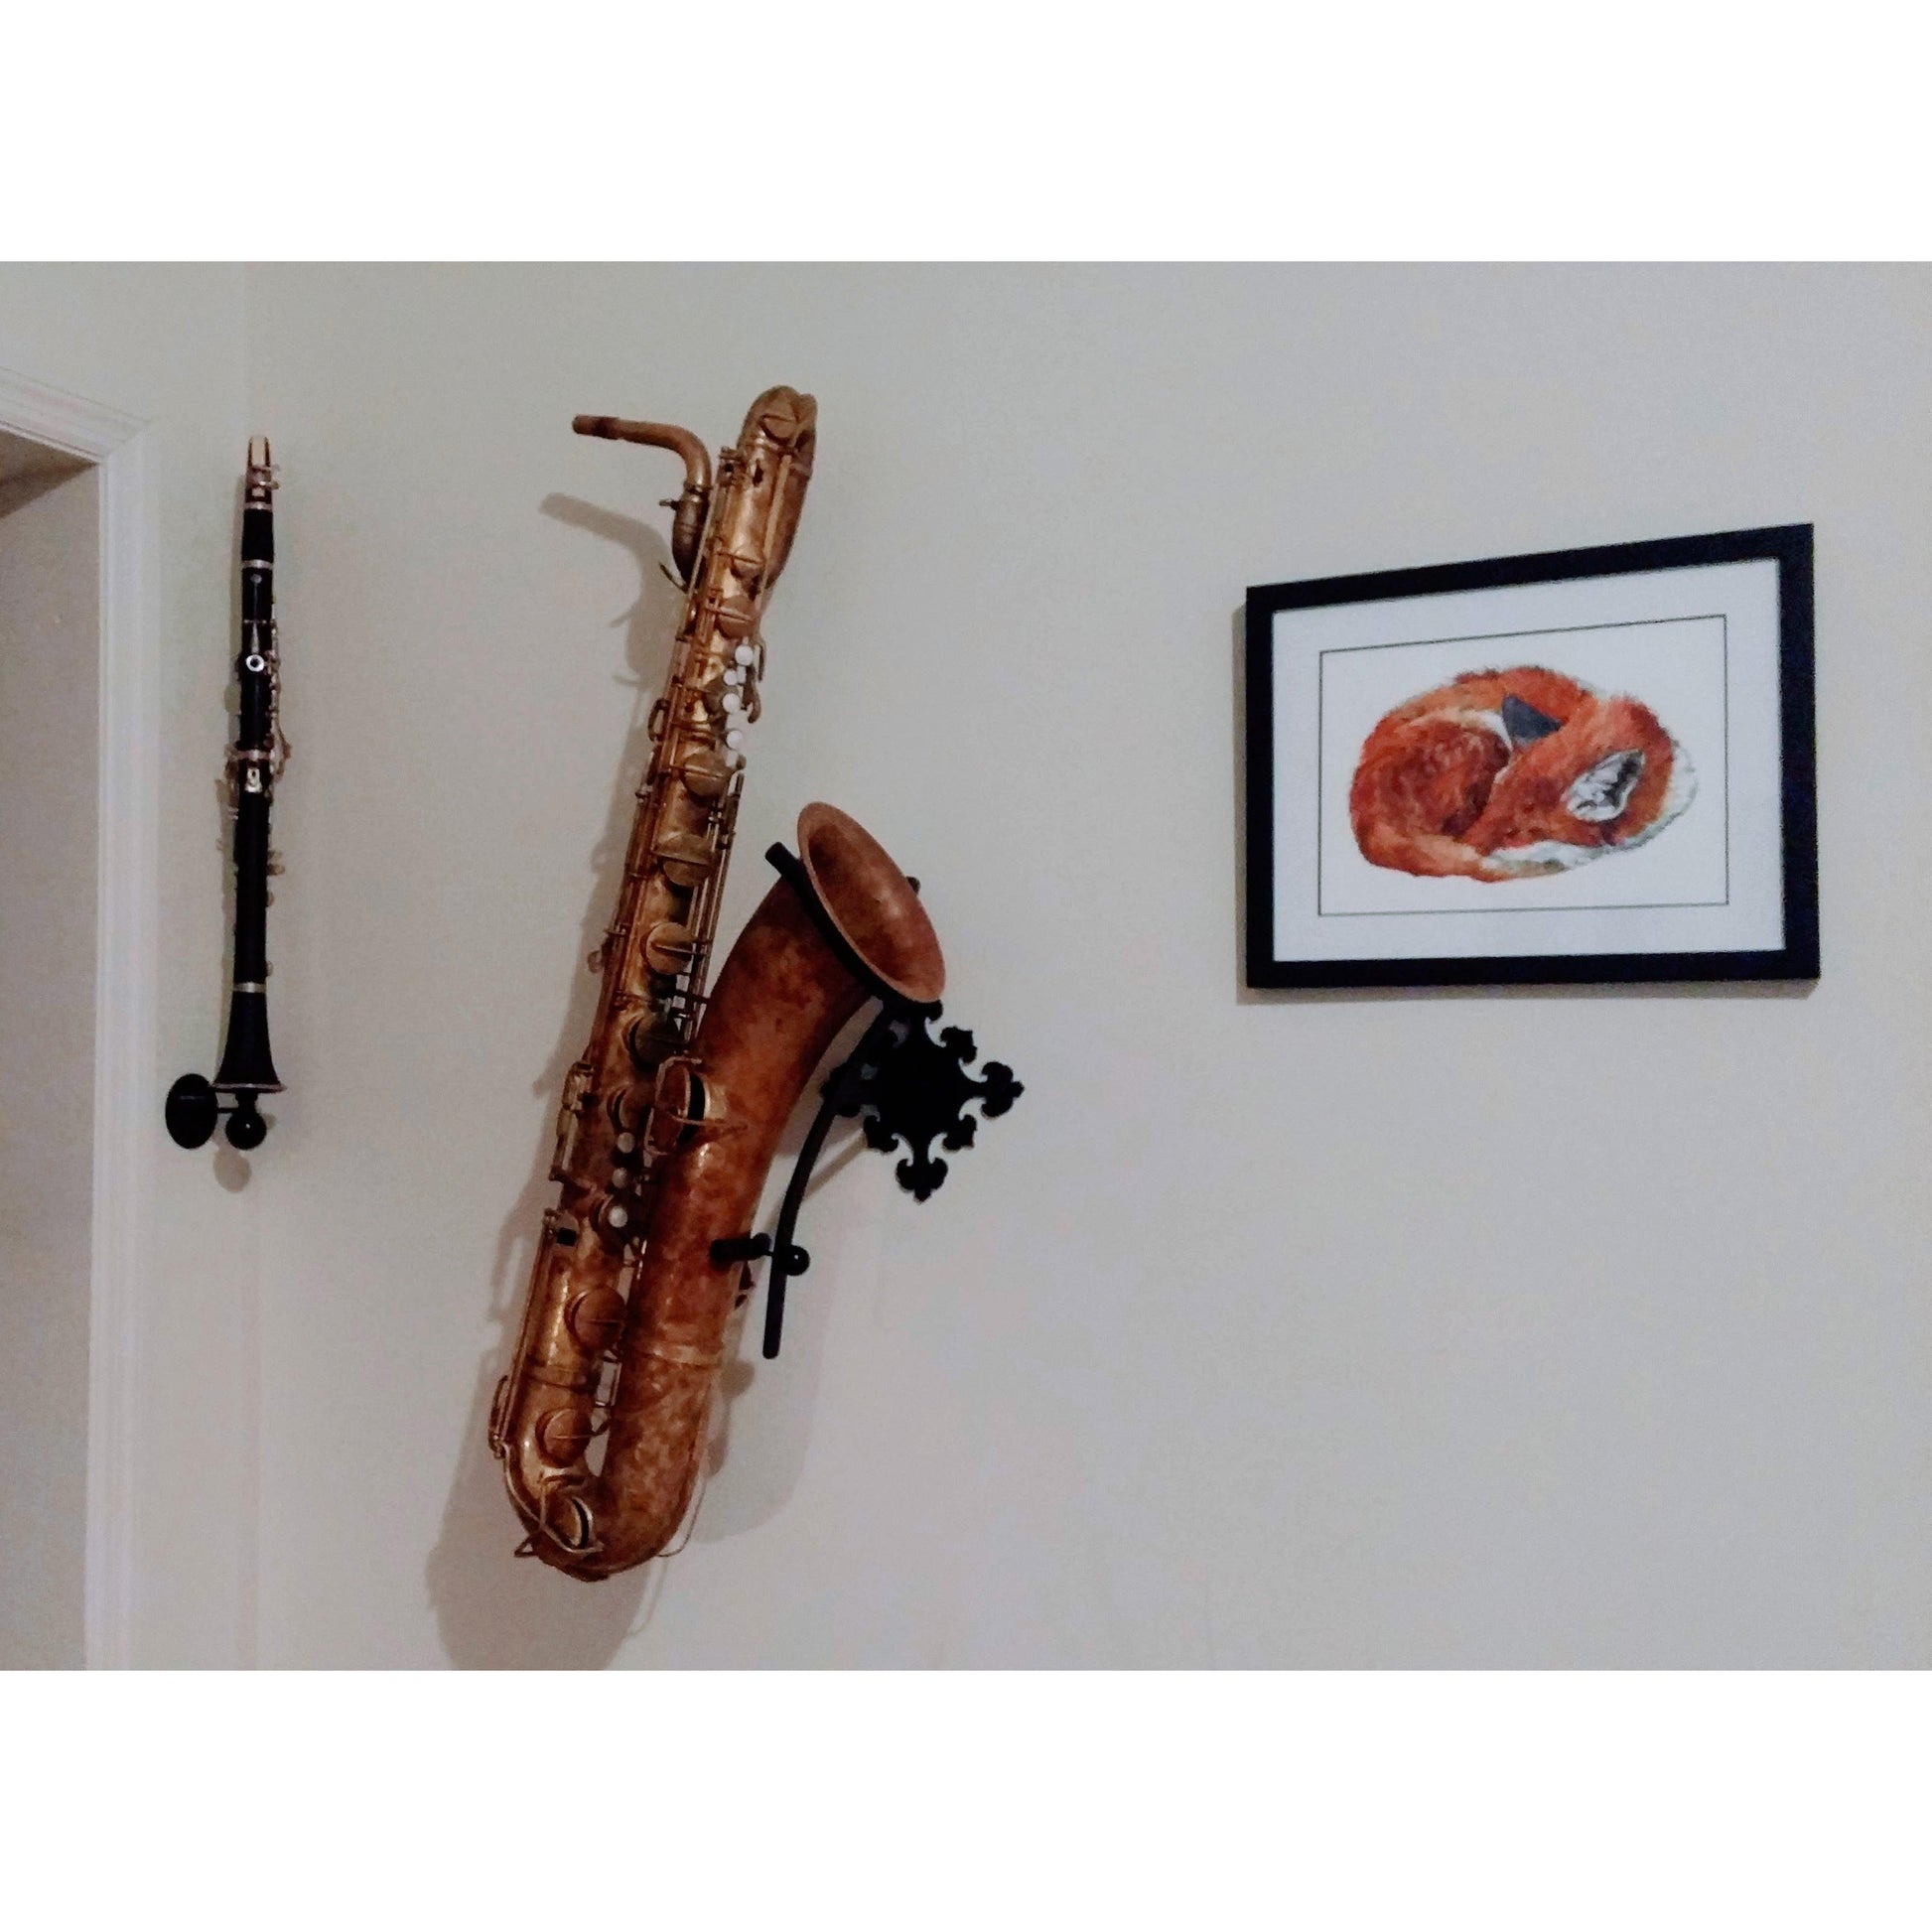 baritone saxophone and clarinet in wallmounted stands by Locoparasaxo